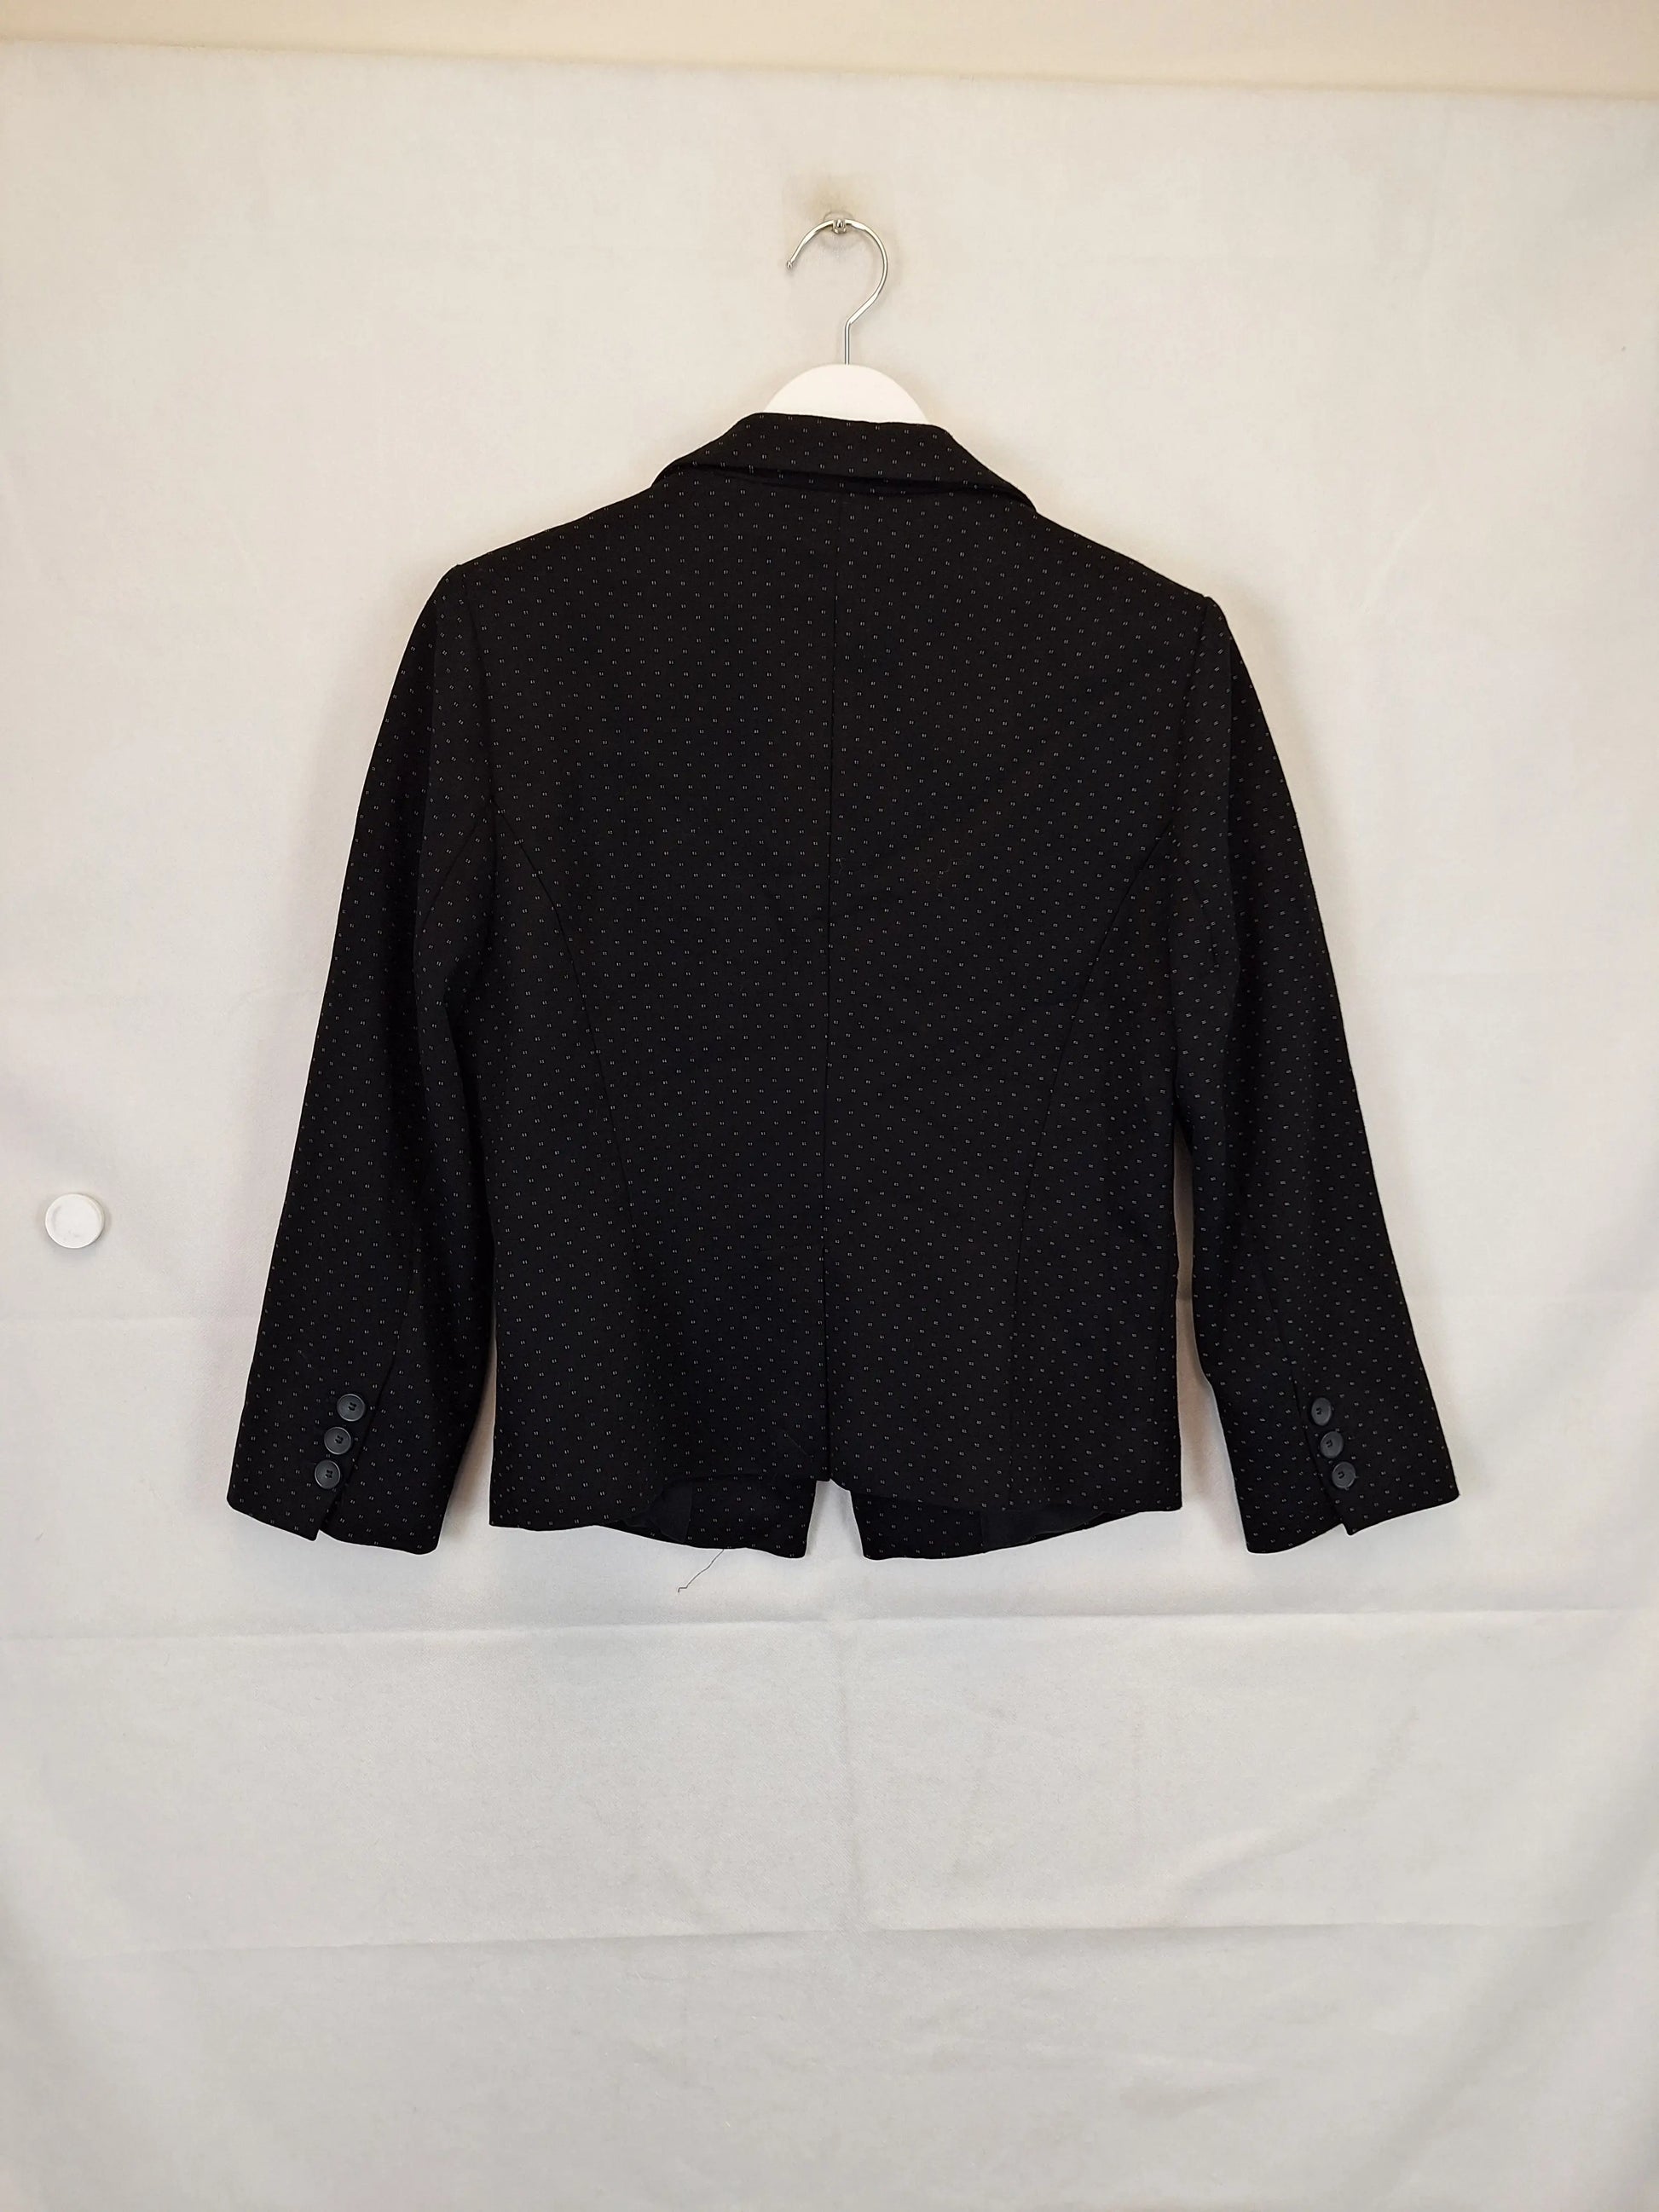 Marcs Sophisticated Print  Blazer Size 10 by SwapUp-Online Second Hand Store-Online Thrift Store